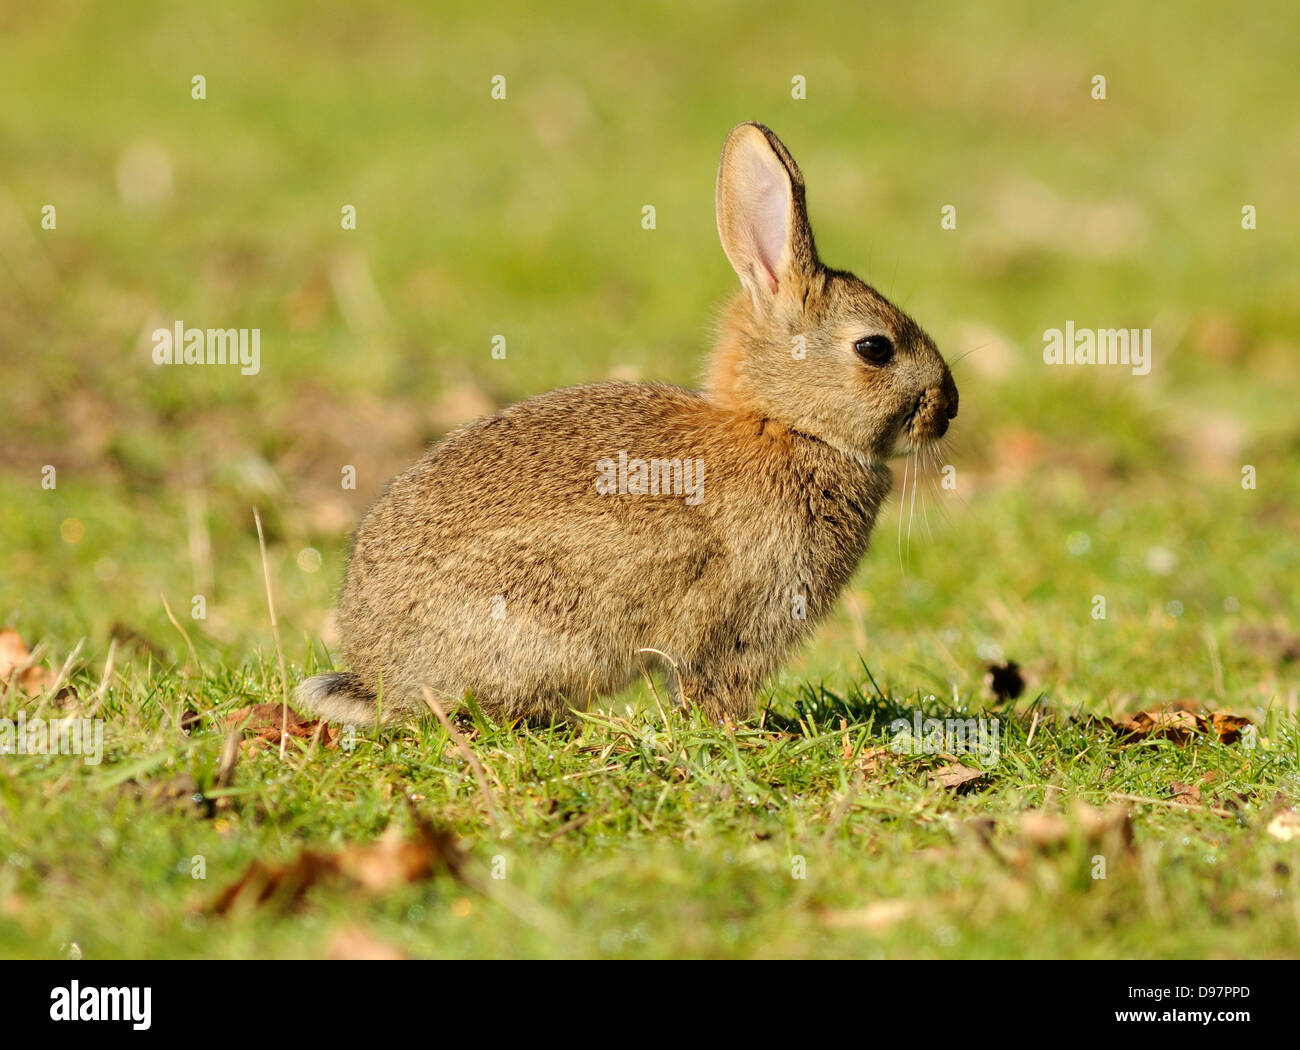 Young rabbit in a field Stock Photo